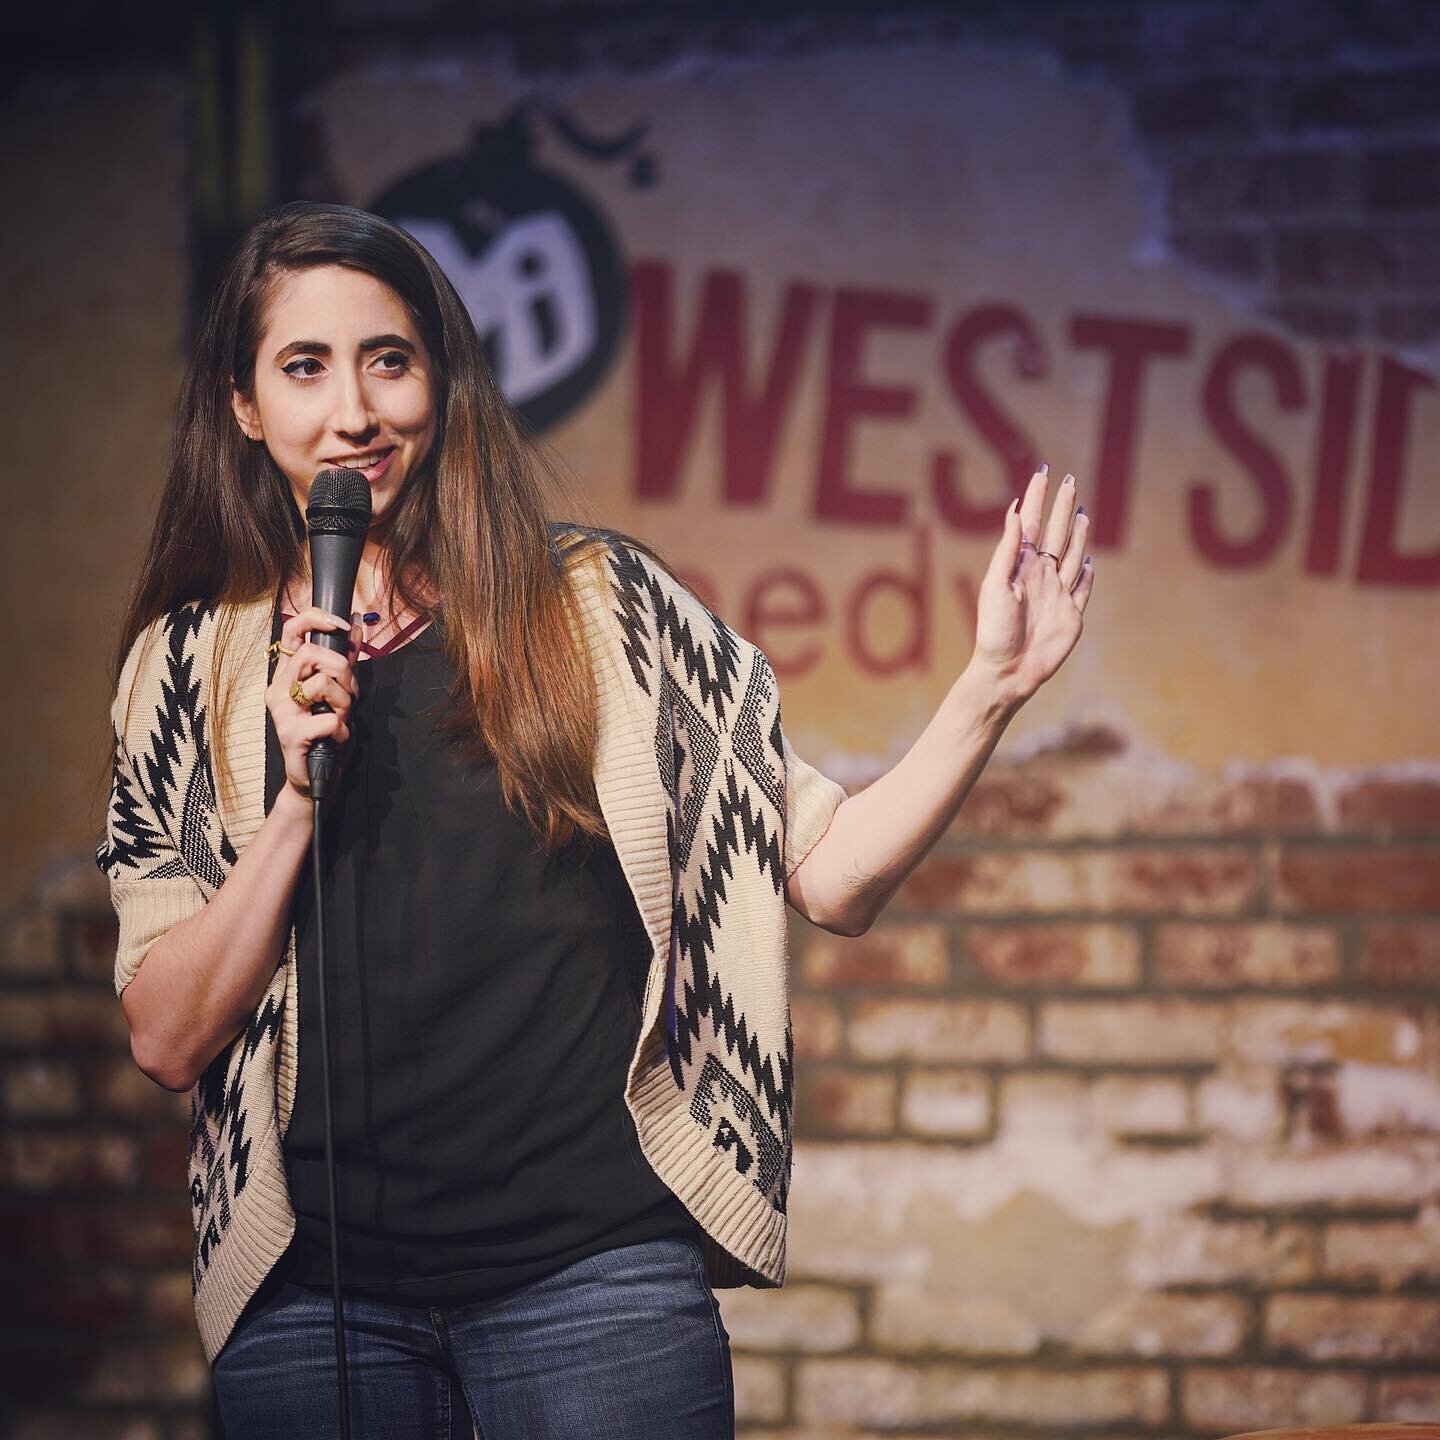 This show was so fun I forgot how to stand like a regular fkin human.
.
Why do I look like I just dragged my injured leg from the battlefield just to take this photo?
.
.
.
#comedy #westsidecomedy
#facialrecognitioncomedy #standup #comedian